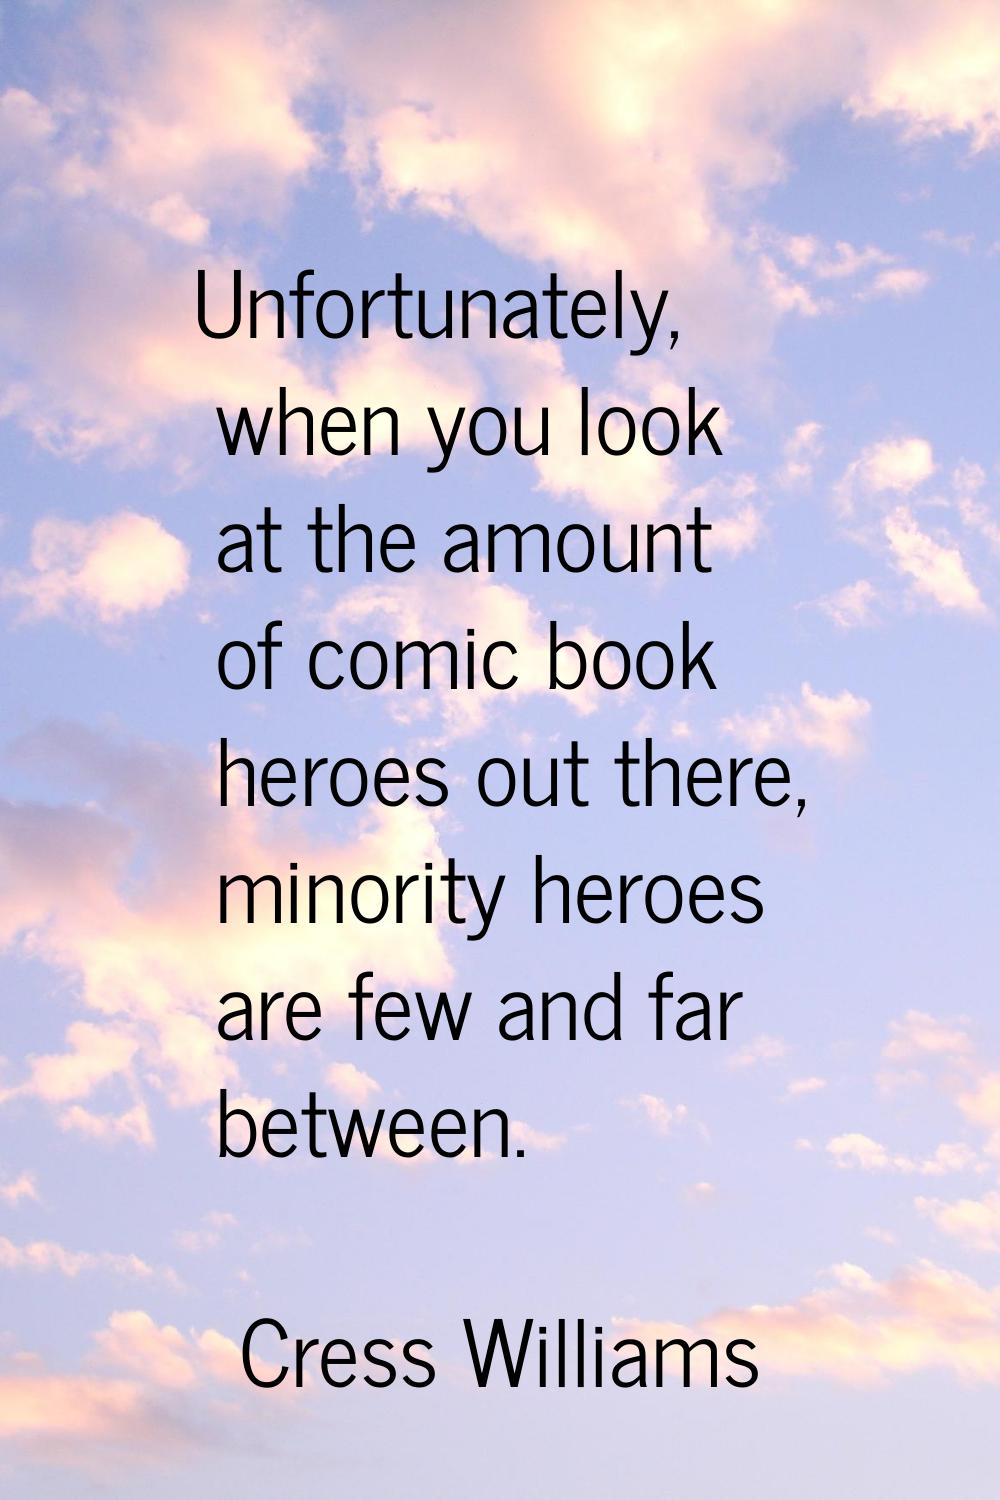 Unfortunately, when you look at the amount of comic book heroes out there, minority heroes are few 